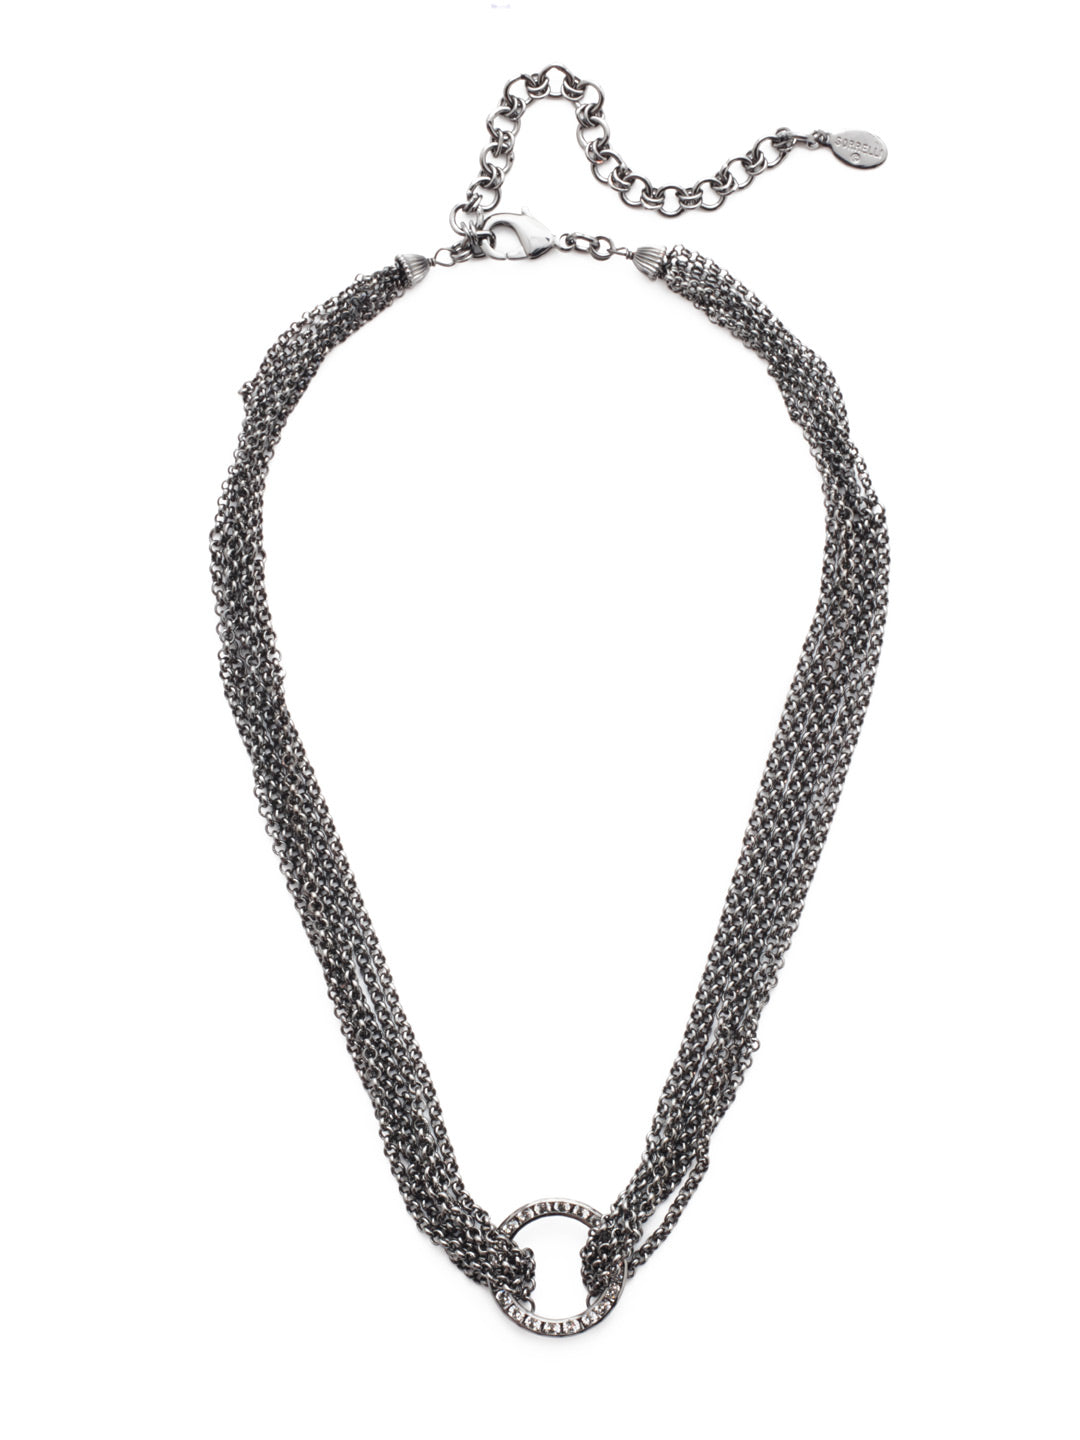 Charlie Tennis Necklace - NEU6GMGNS - <p>Our Charlie Tennis Necklace is a chainmetal lovers' must-have. At its center is a hoop encrusted with signature Sorrelli sparkling crystals. From Sorrelli's Golden Shadow collection in our Gun Metal finish.</p>